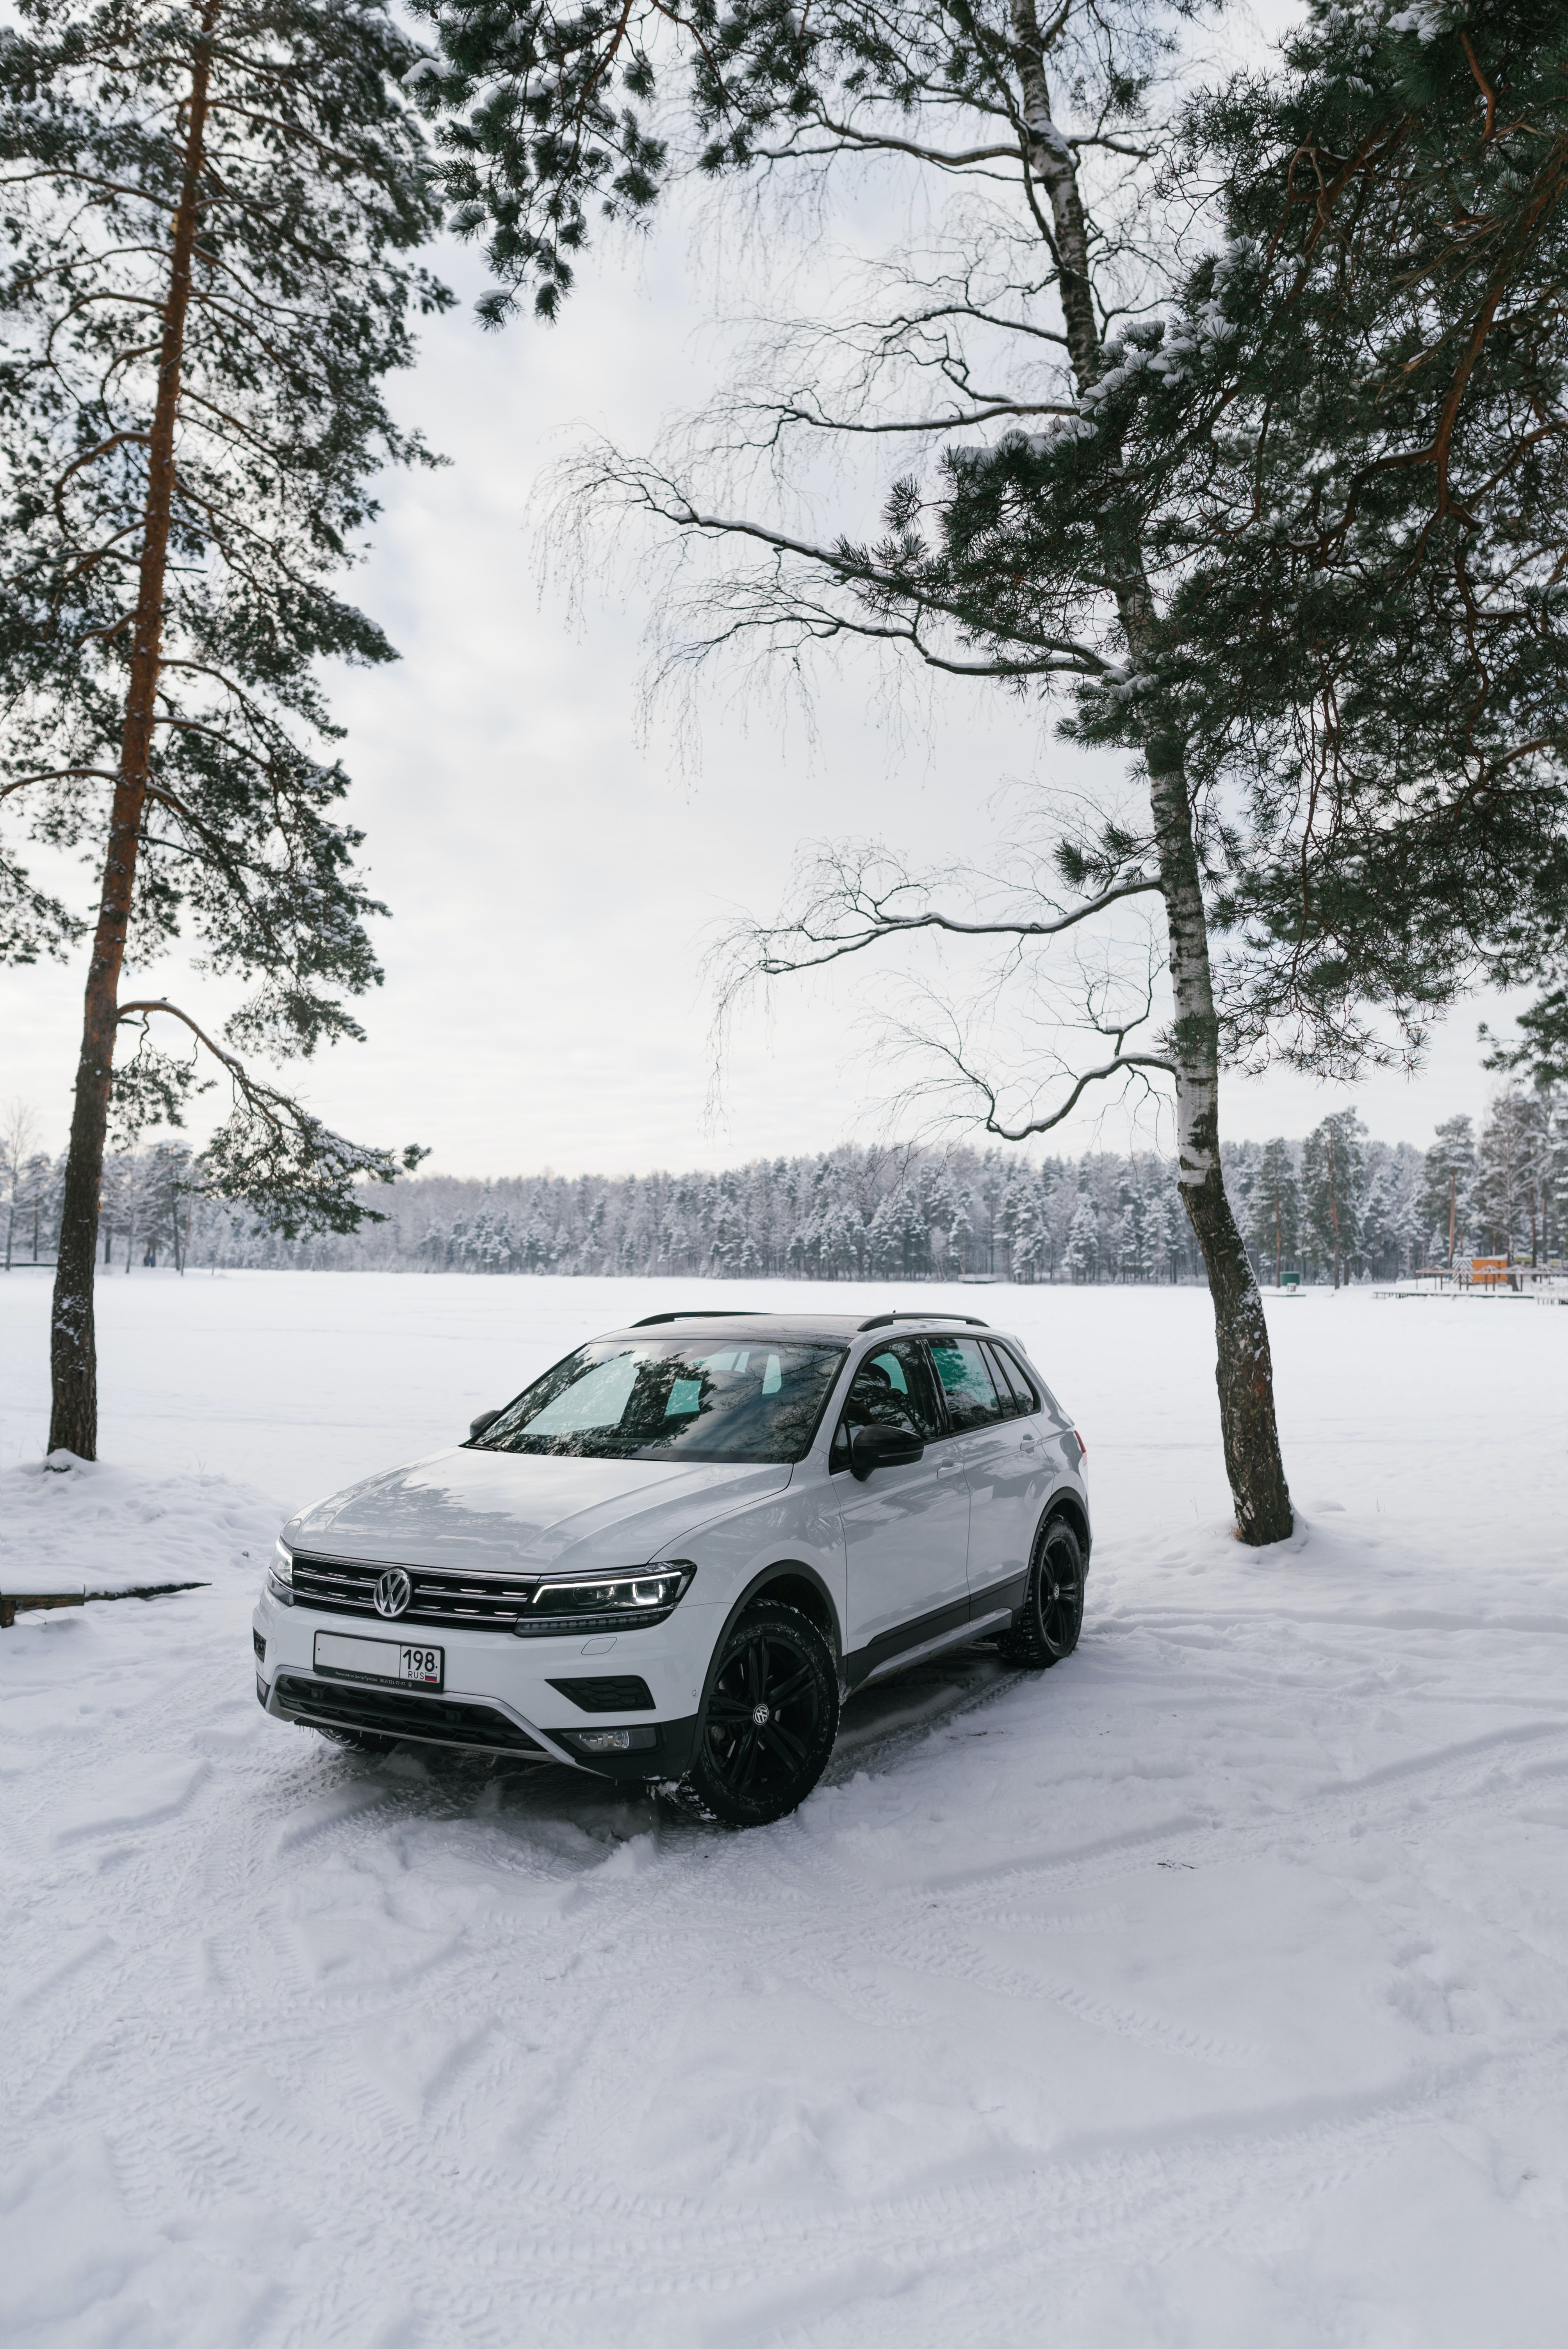 android snow, volkswagen, car, cars, white, side view, volkswagen tiguan